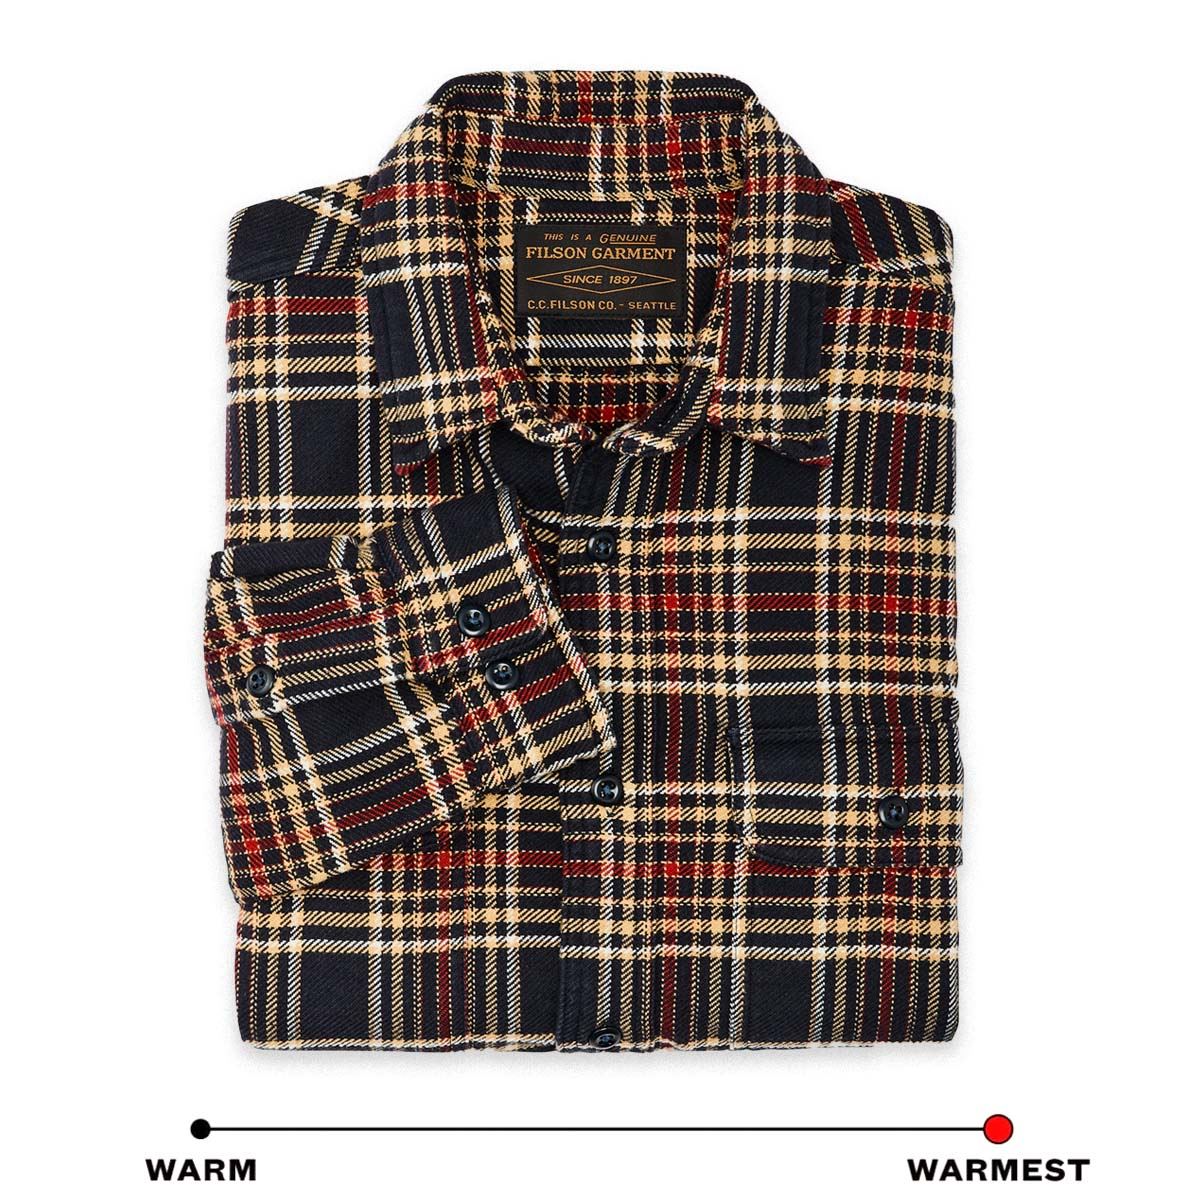 Filson Vintage Flannel Work Shirt Navy Ivory Red, built with thick and breathable cotton flannel, it’s ideal for cold weather